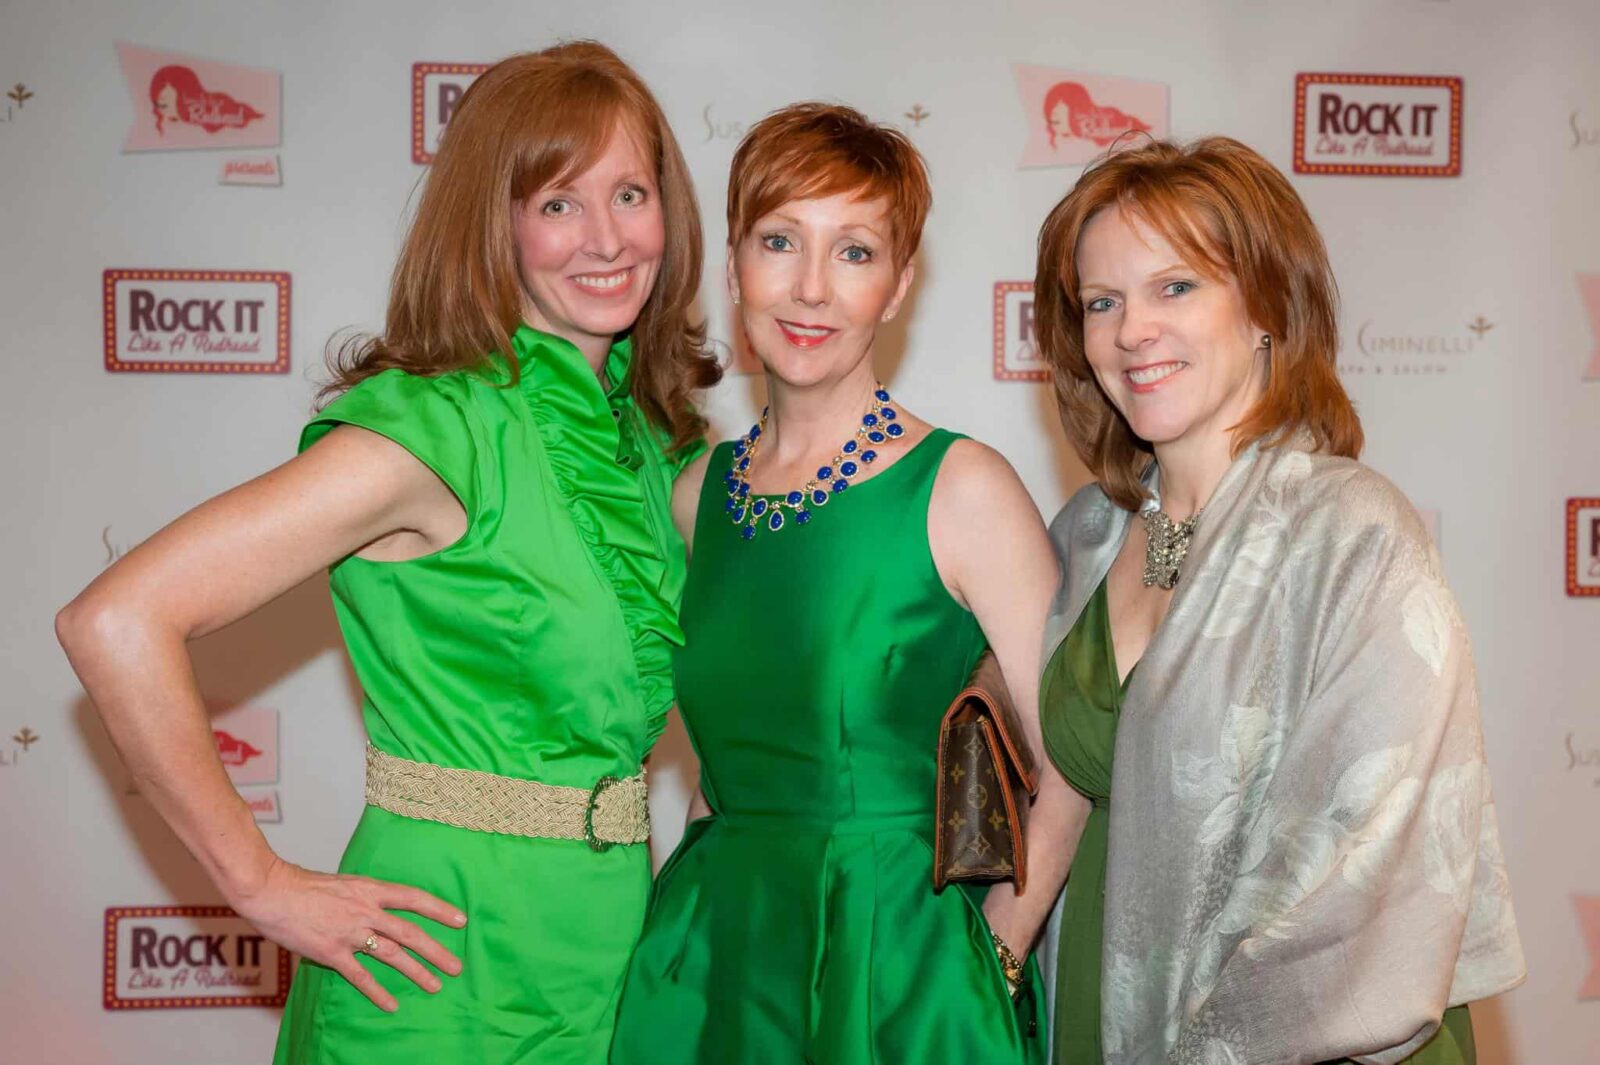 5 Redhead Quotes to Share on St. Patrick’s Day